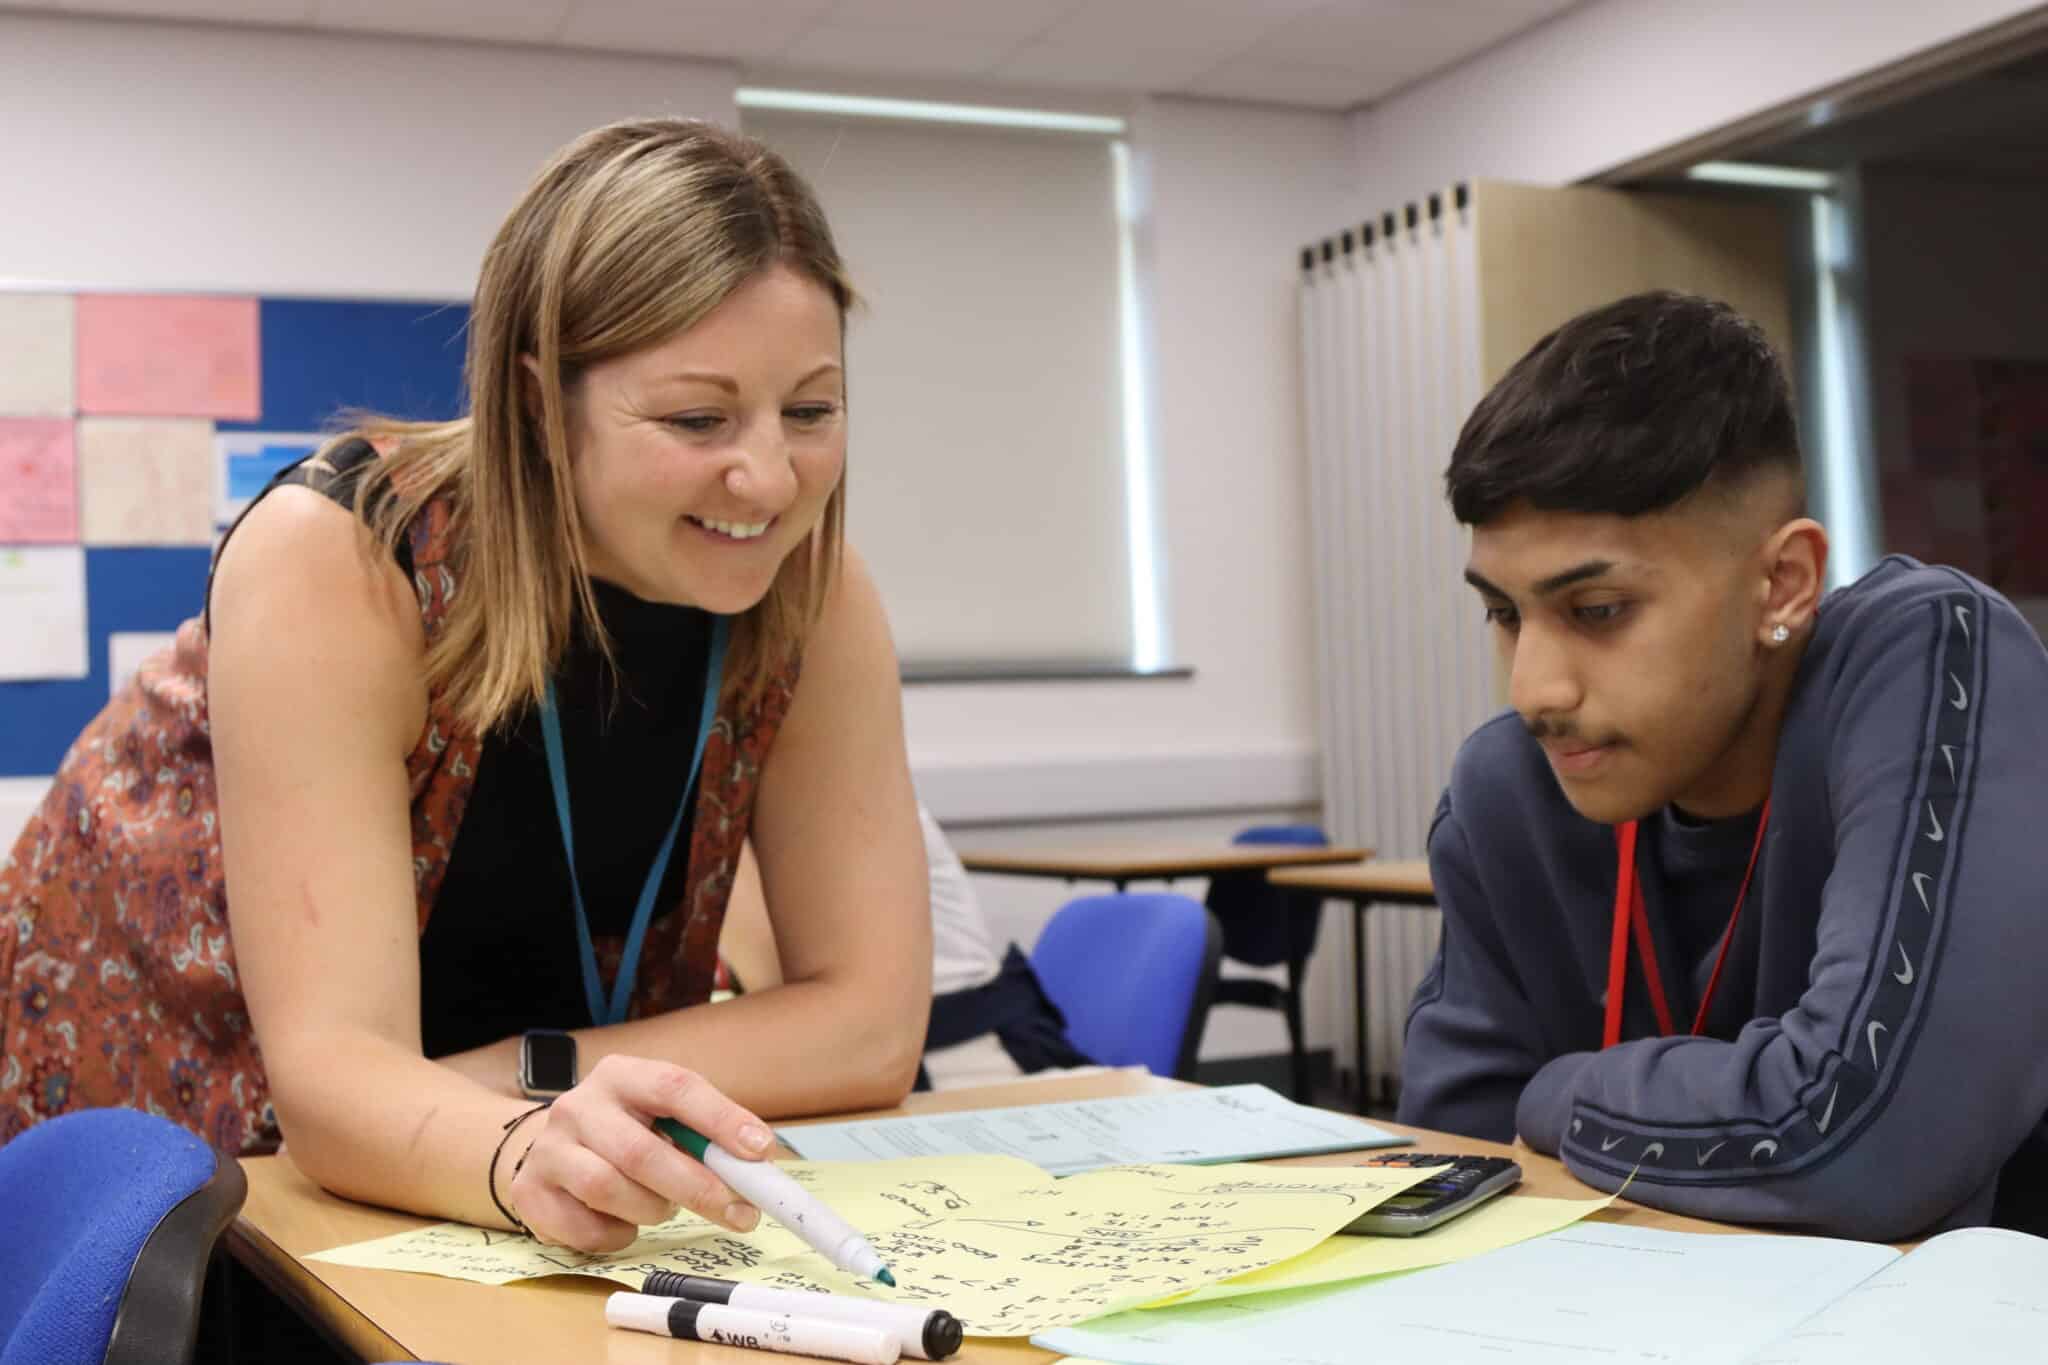 Maths teacher Holly working with a student in the classroom